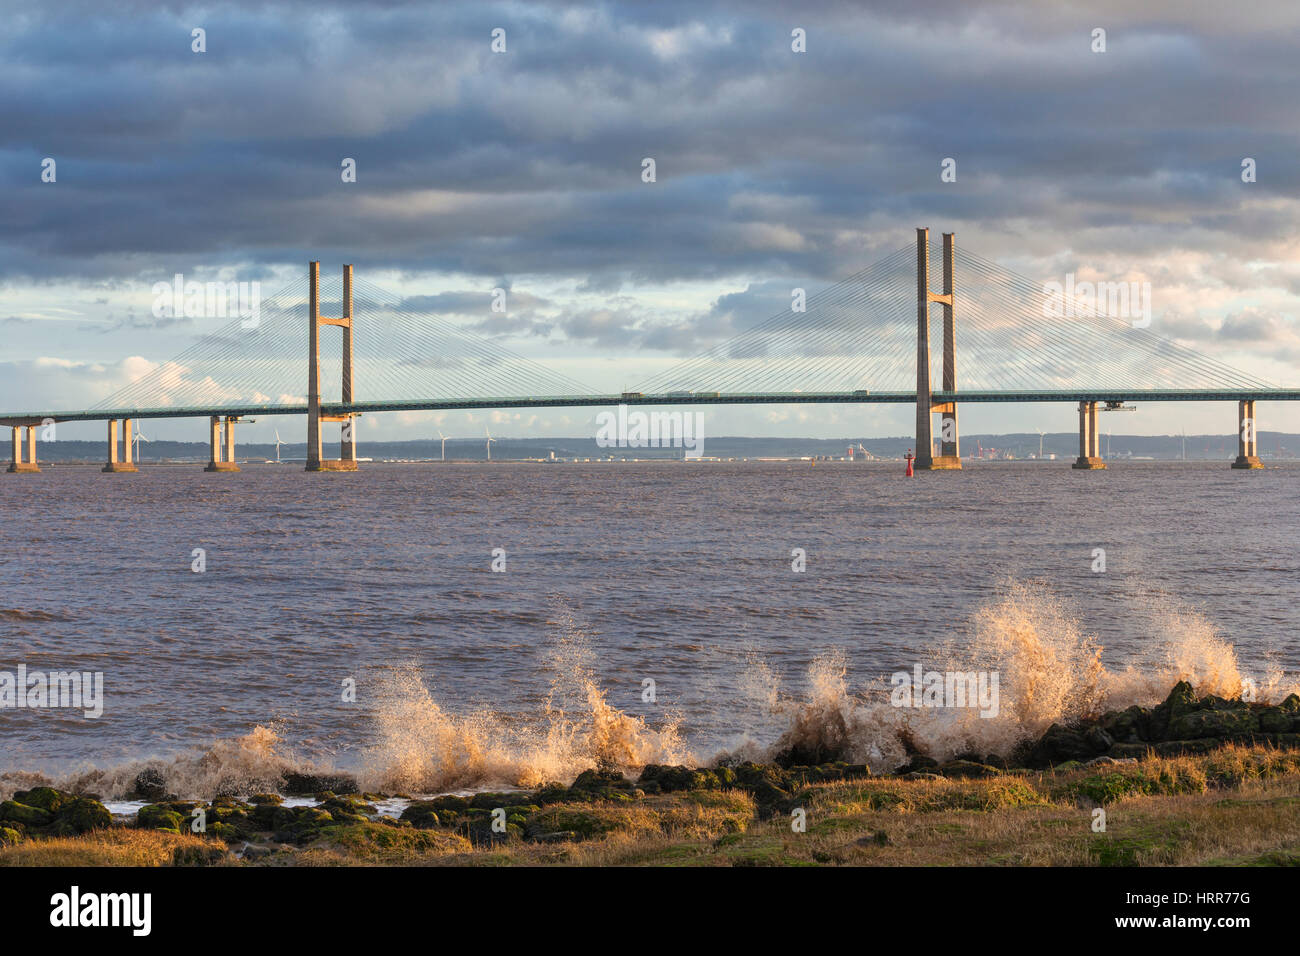 The Second Severn Crossing. Stock Photo